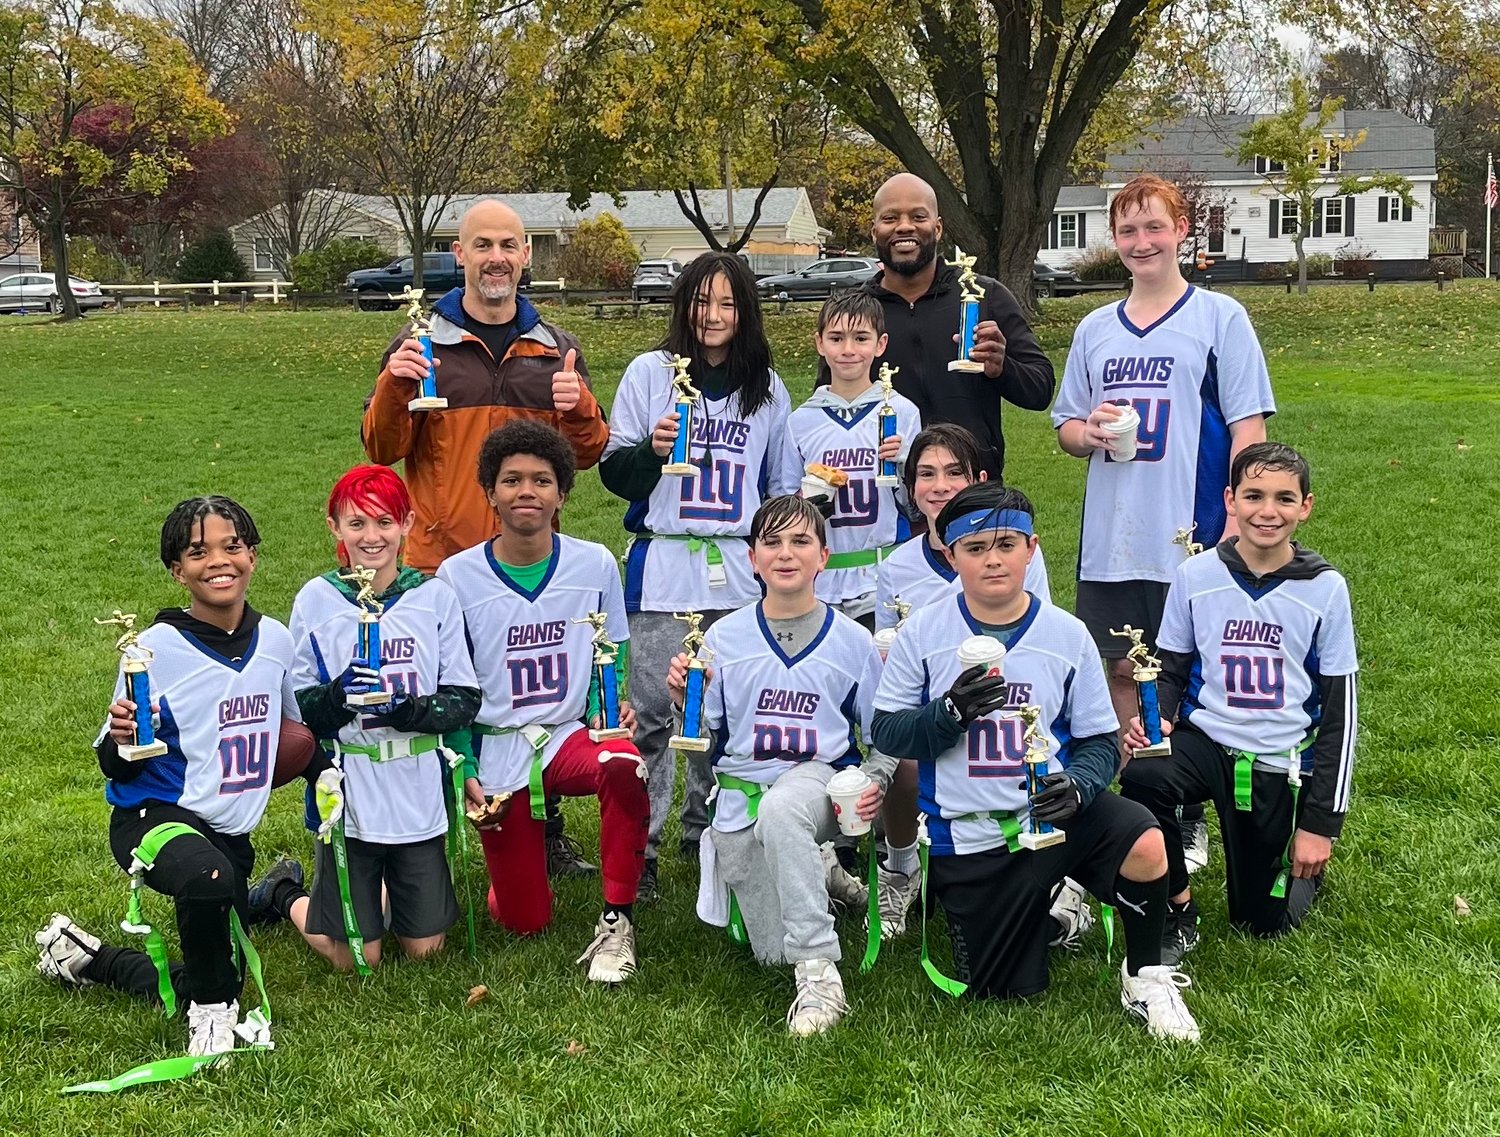 The 12U Giants celebrate the division championship on Sunday, after knocking off the Eagles and Dolphins.